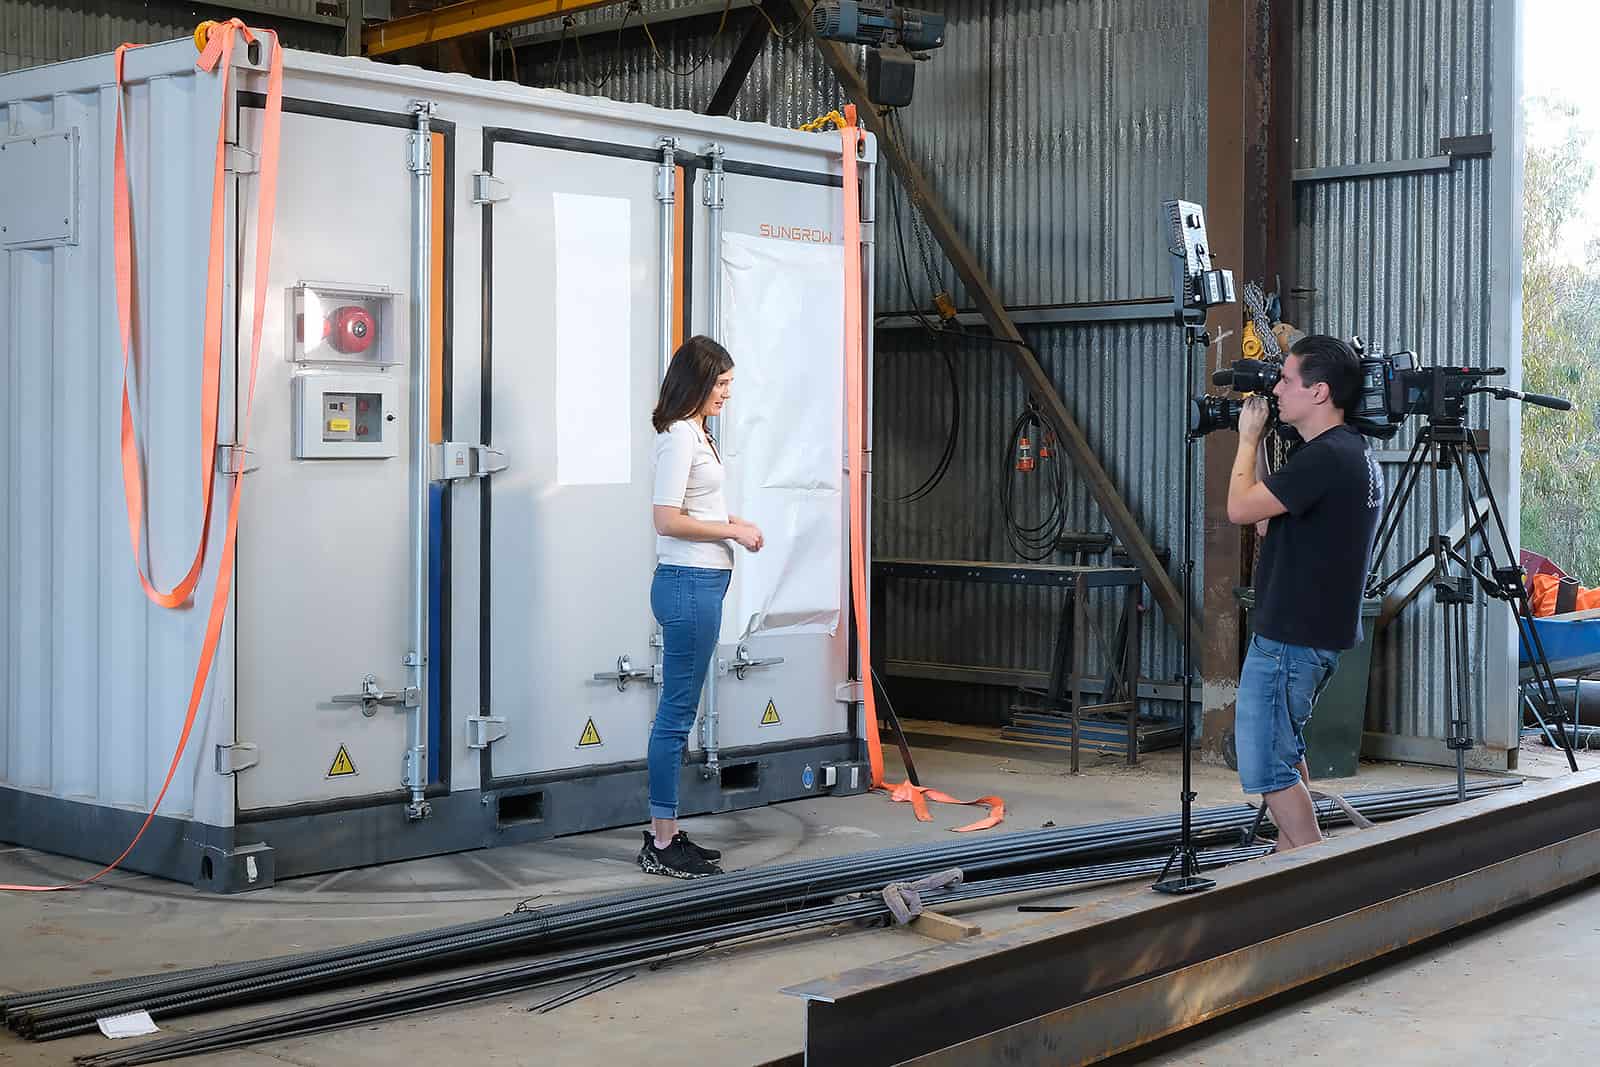 A woman is being filmed in front of what looks like a small shipping container